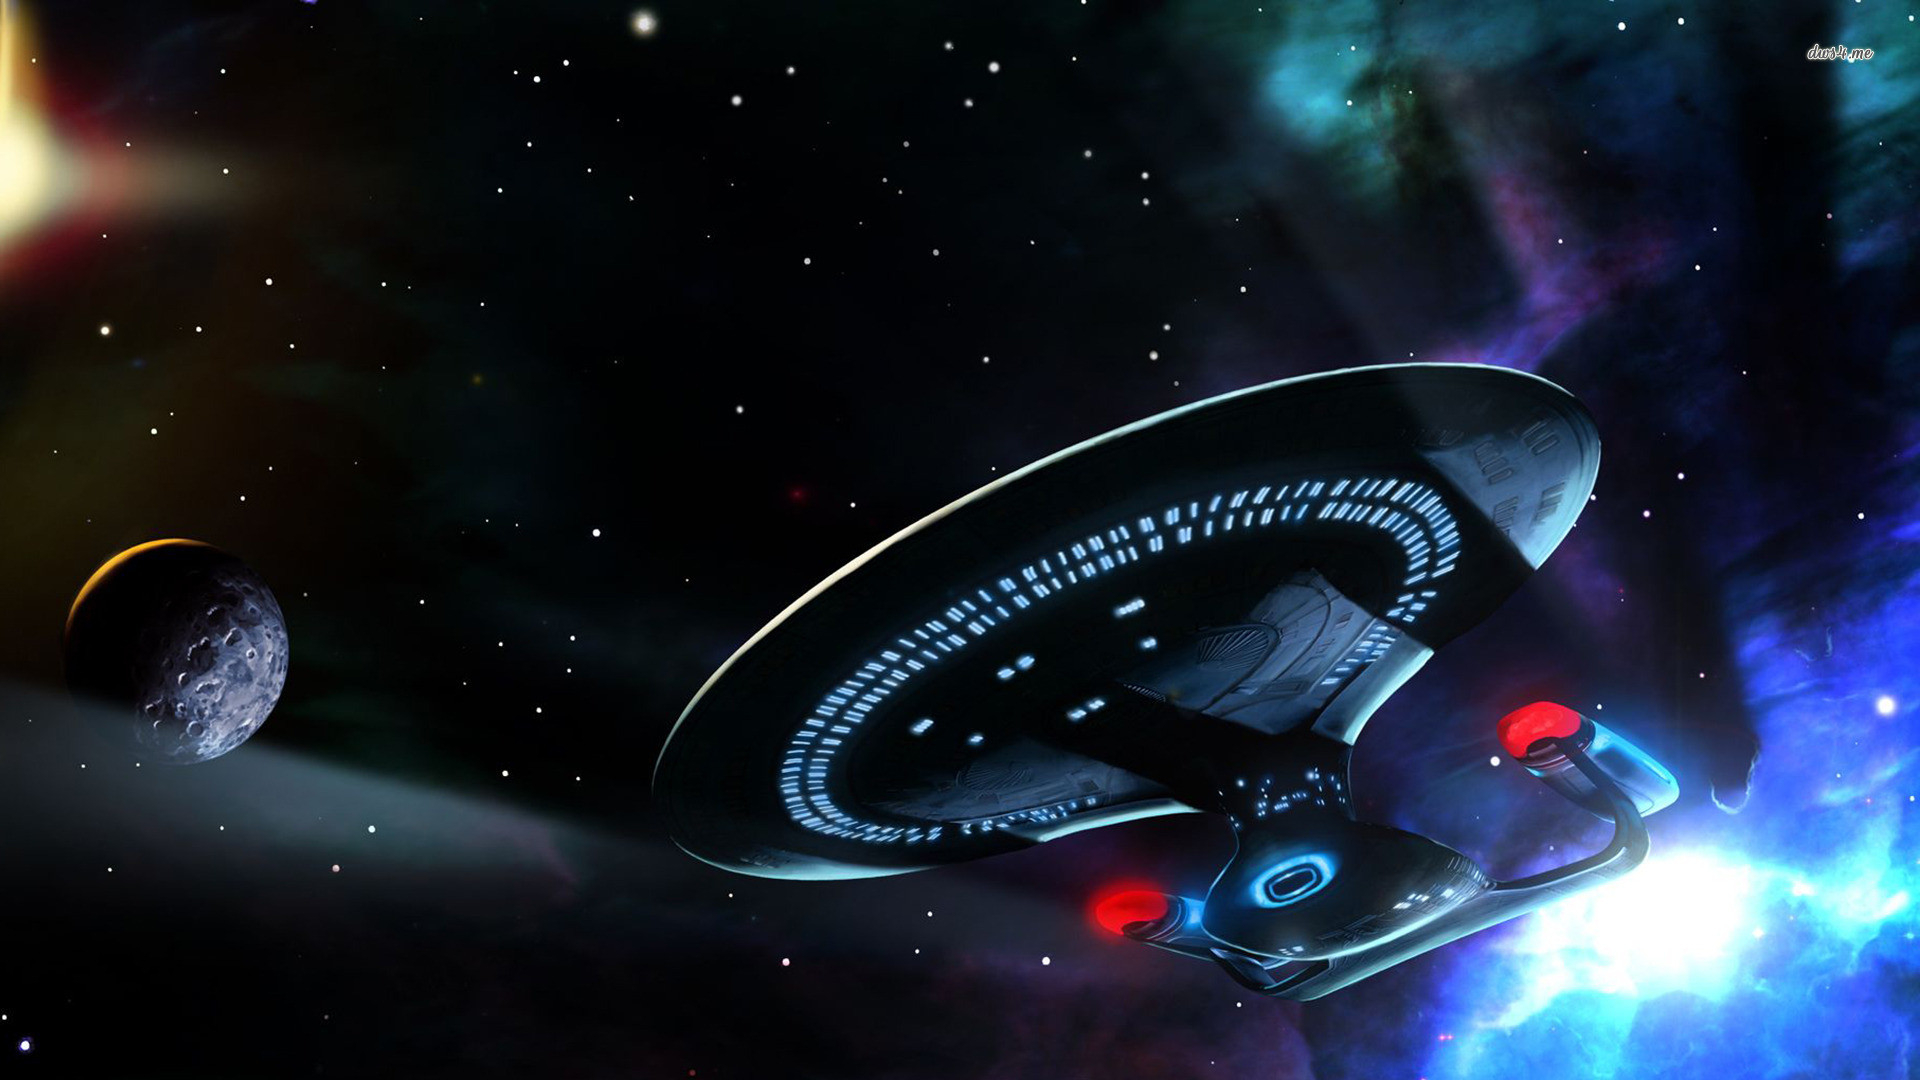 1920x1080 1314 Star Trek HD Wallpapers | Backgrounds - Wallpaper Abyss - Page 2 ...